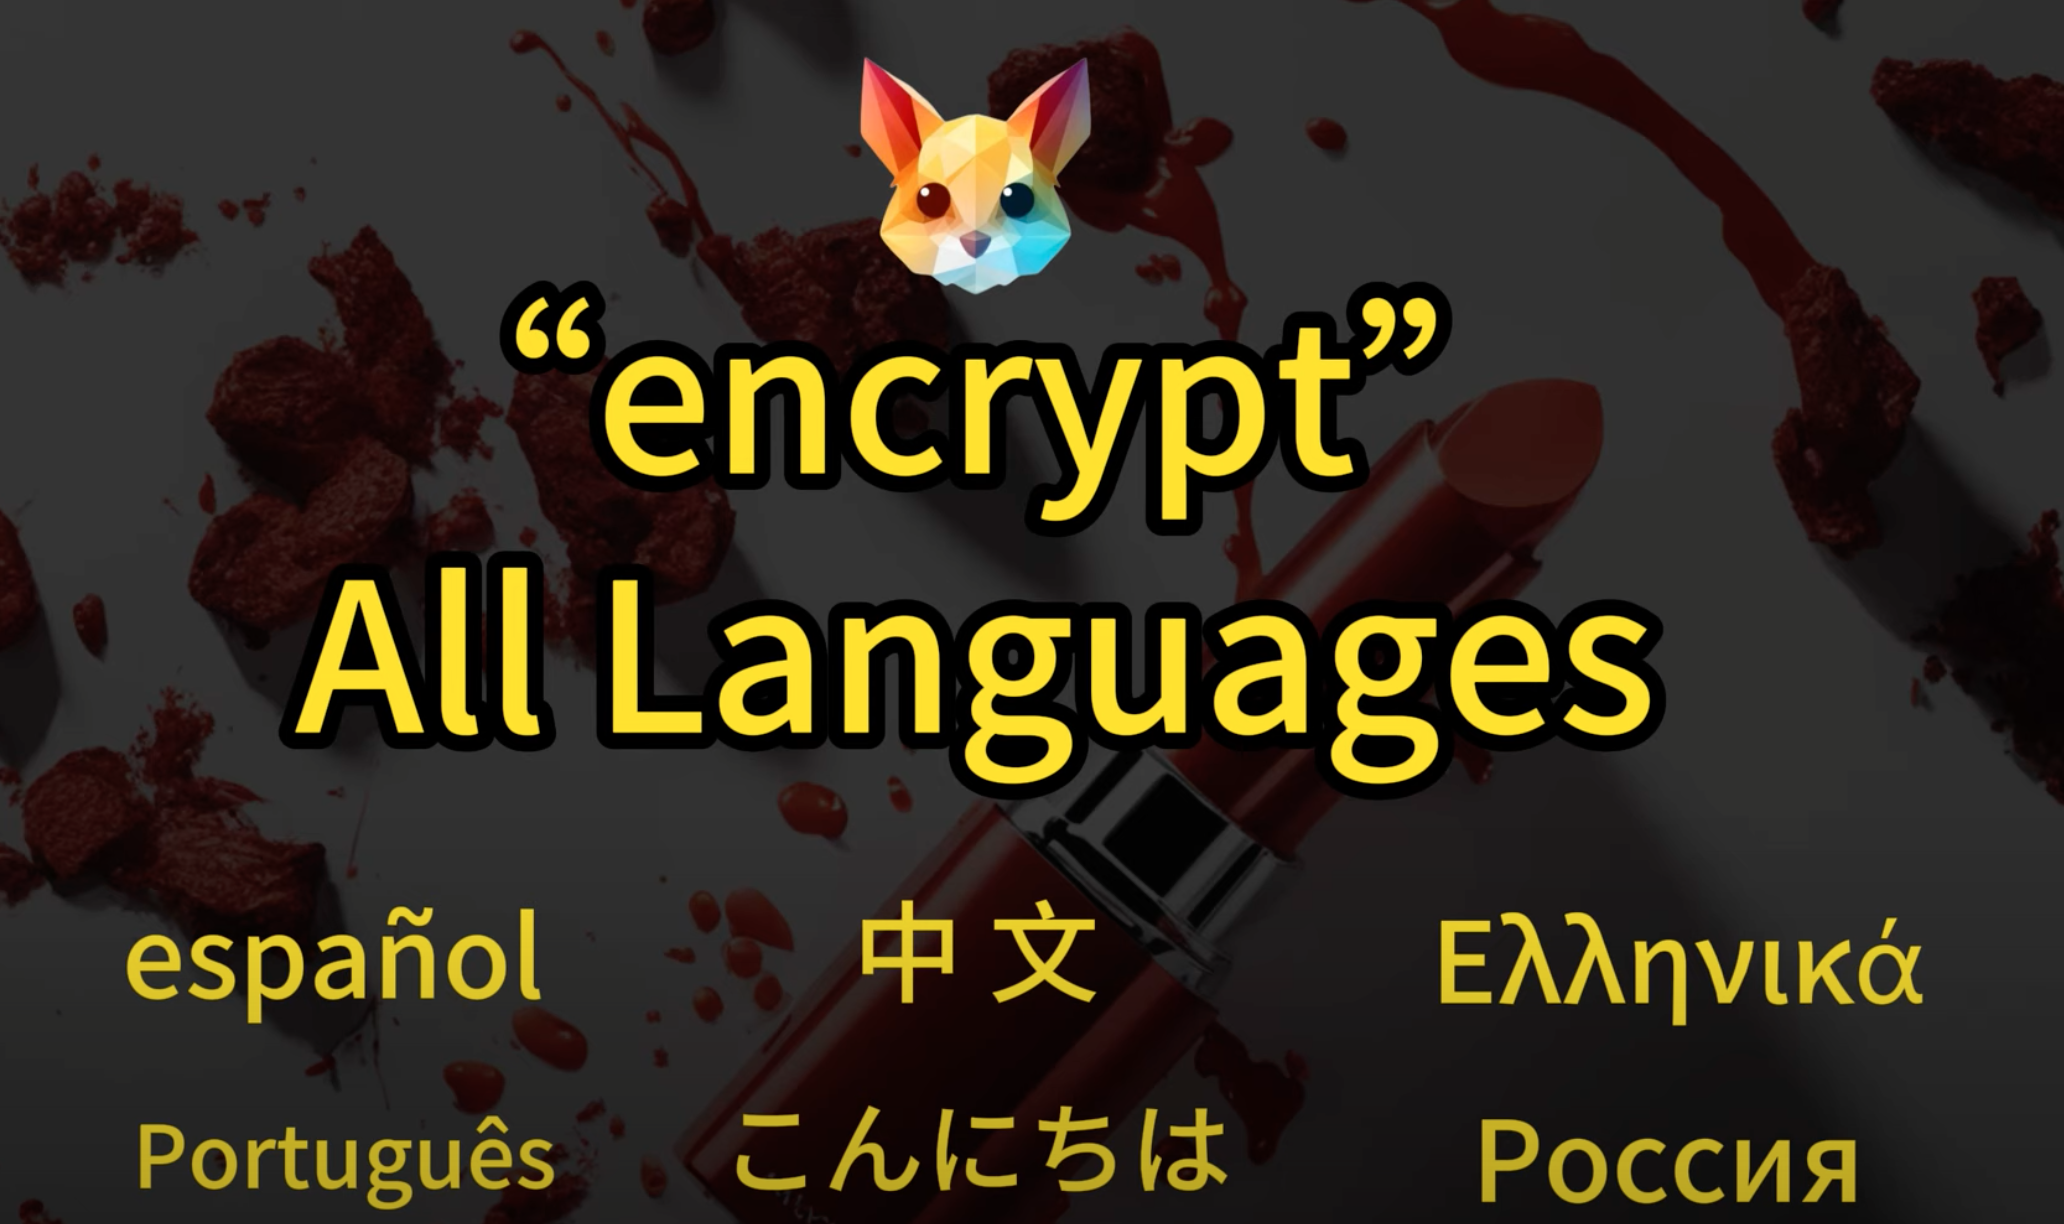 Encrypting Text in Different Languages in PikaLabs